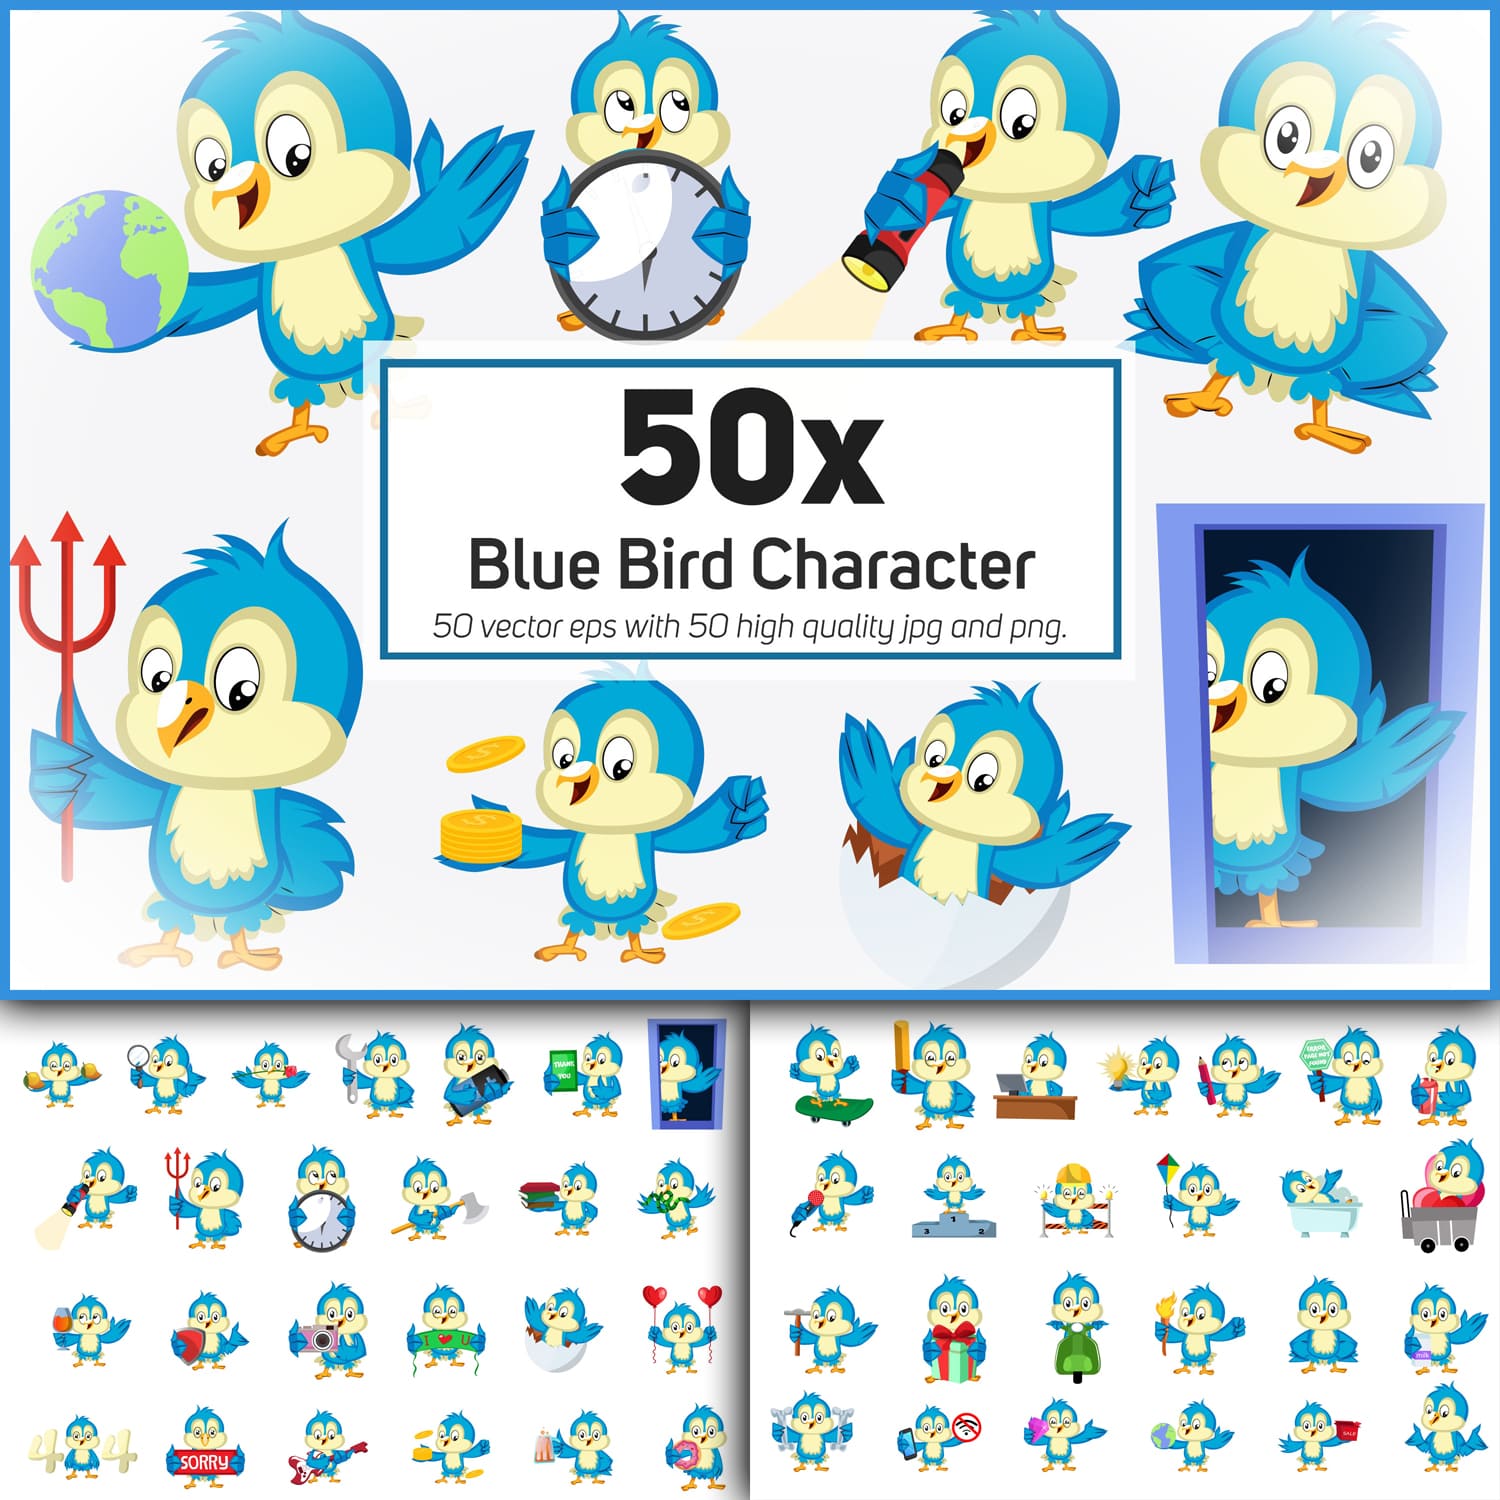 Prints of blue bird character collection illustration.